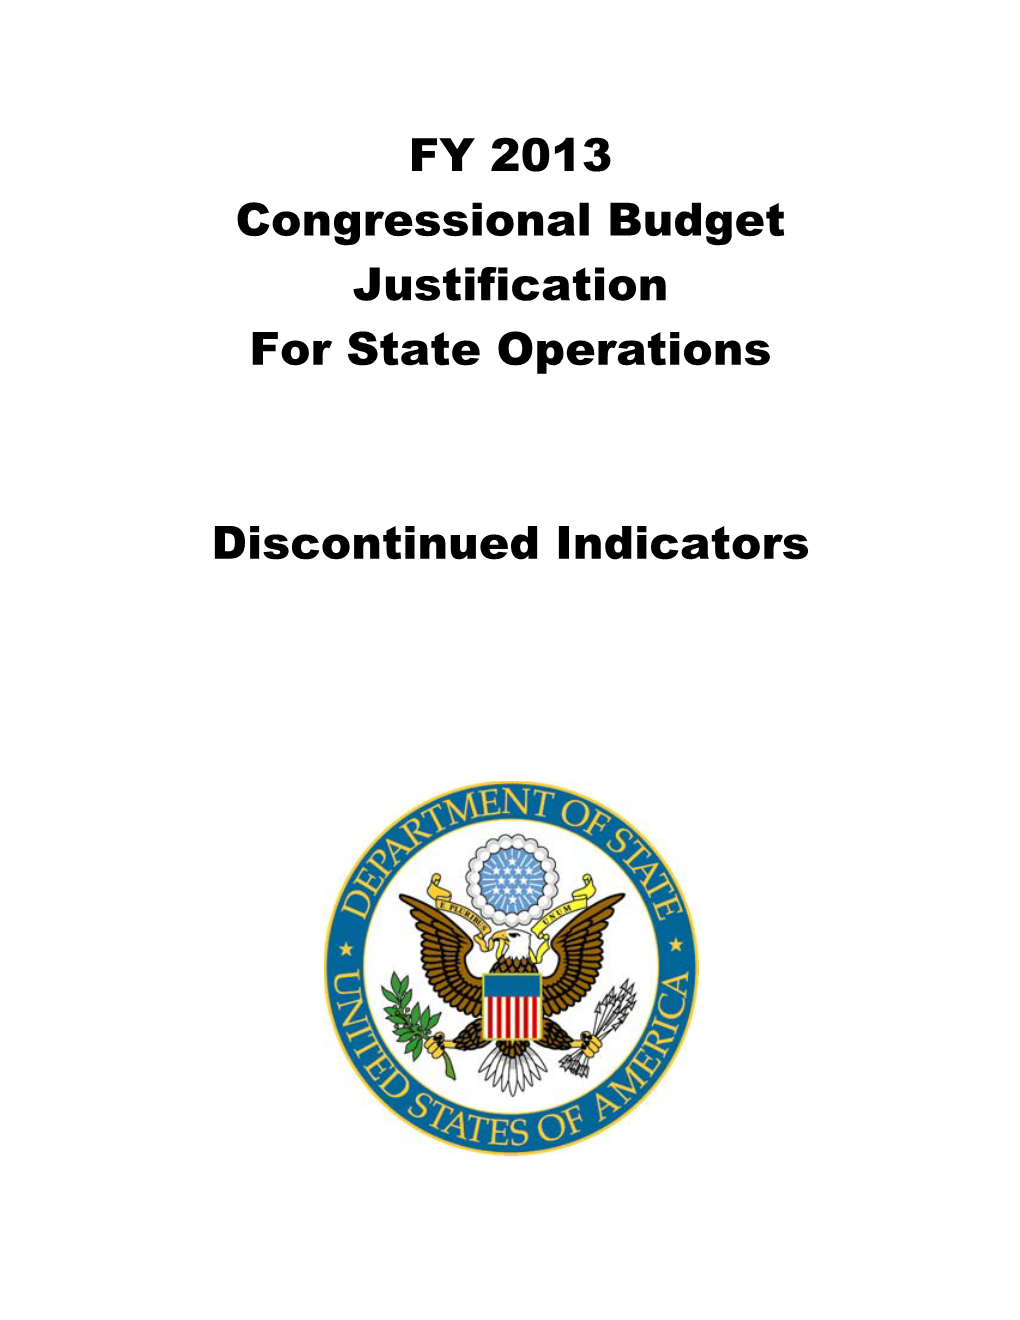 FY 2013 Congressional Budget Justification for State Operations